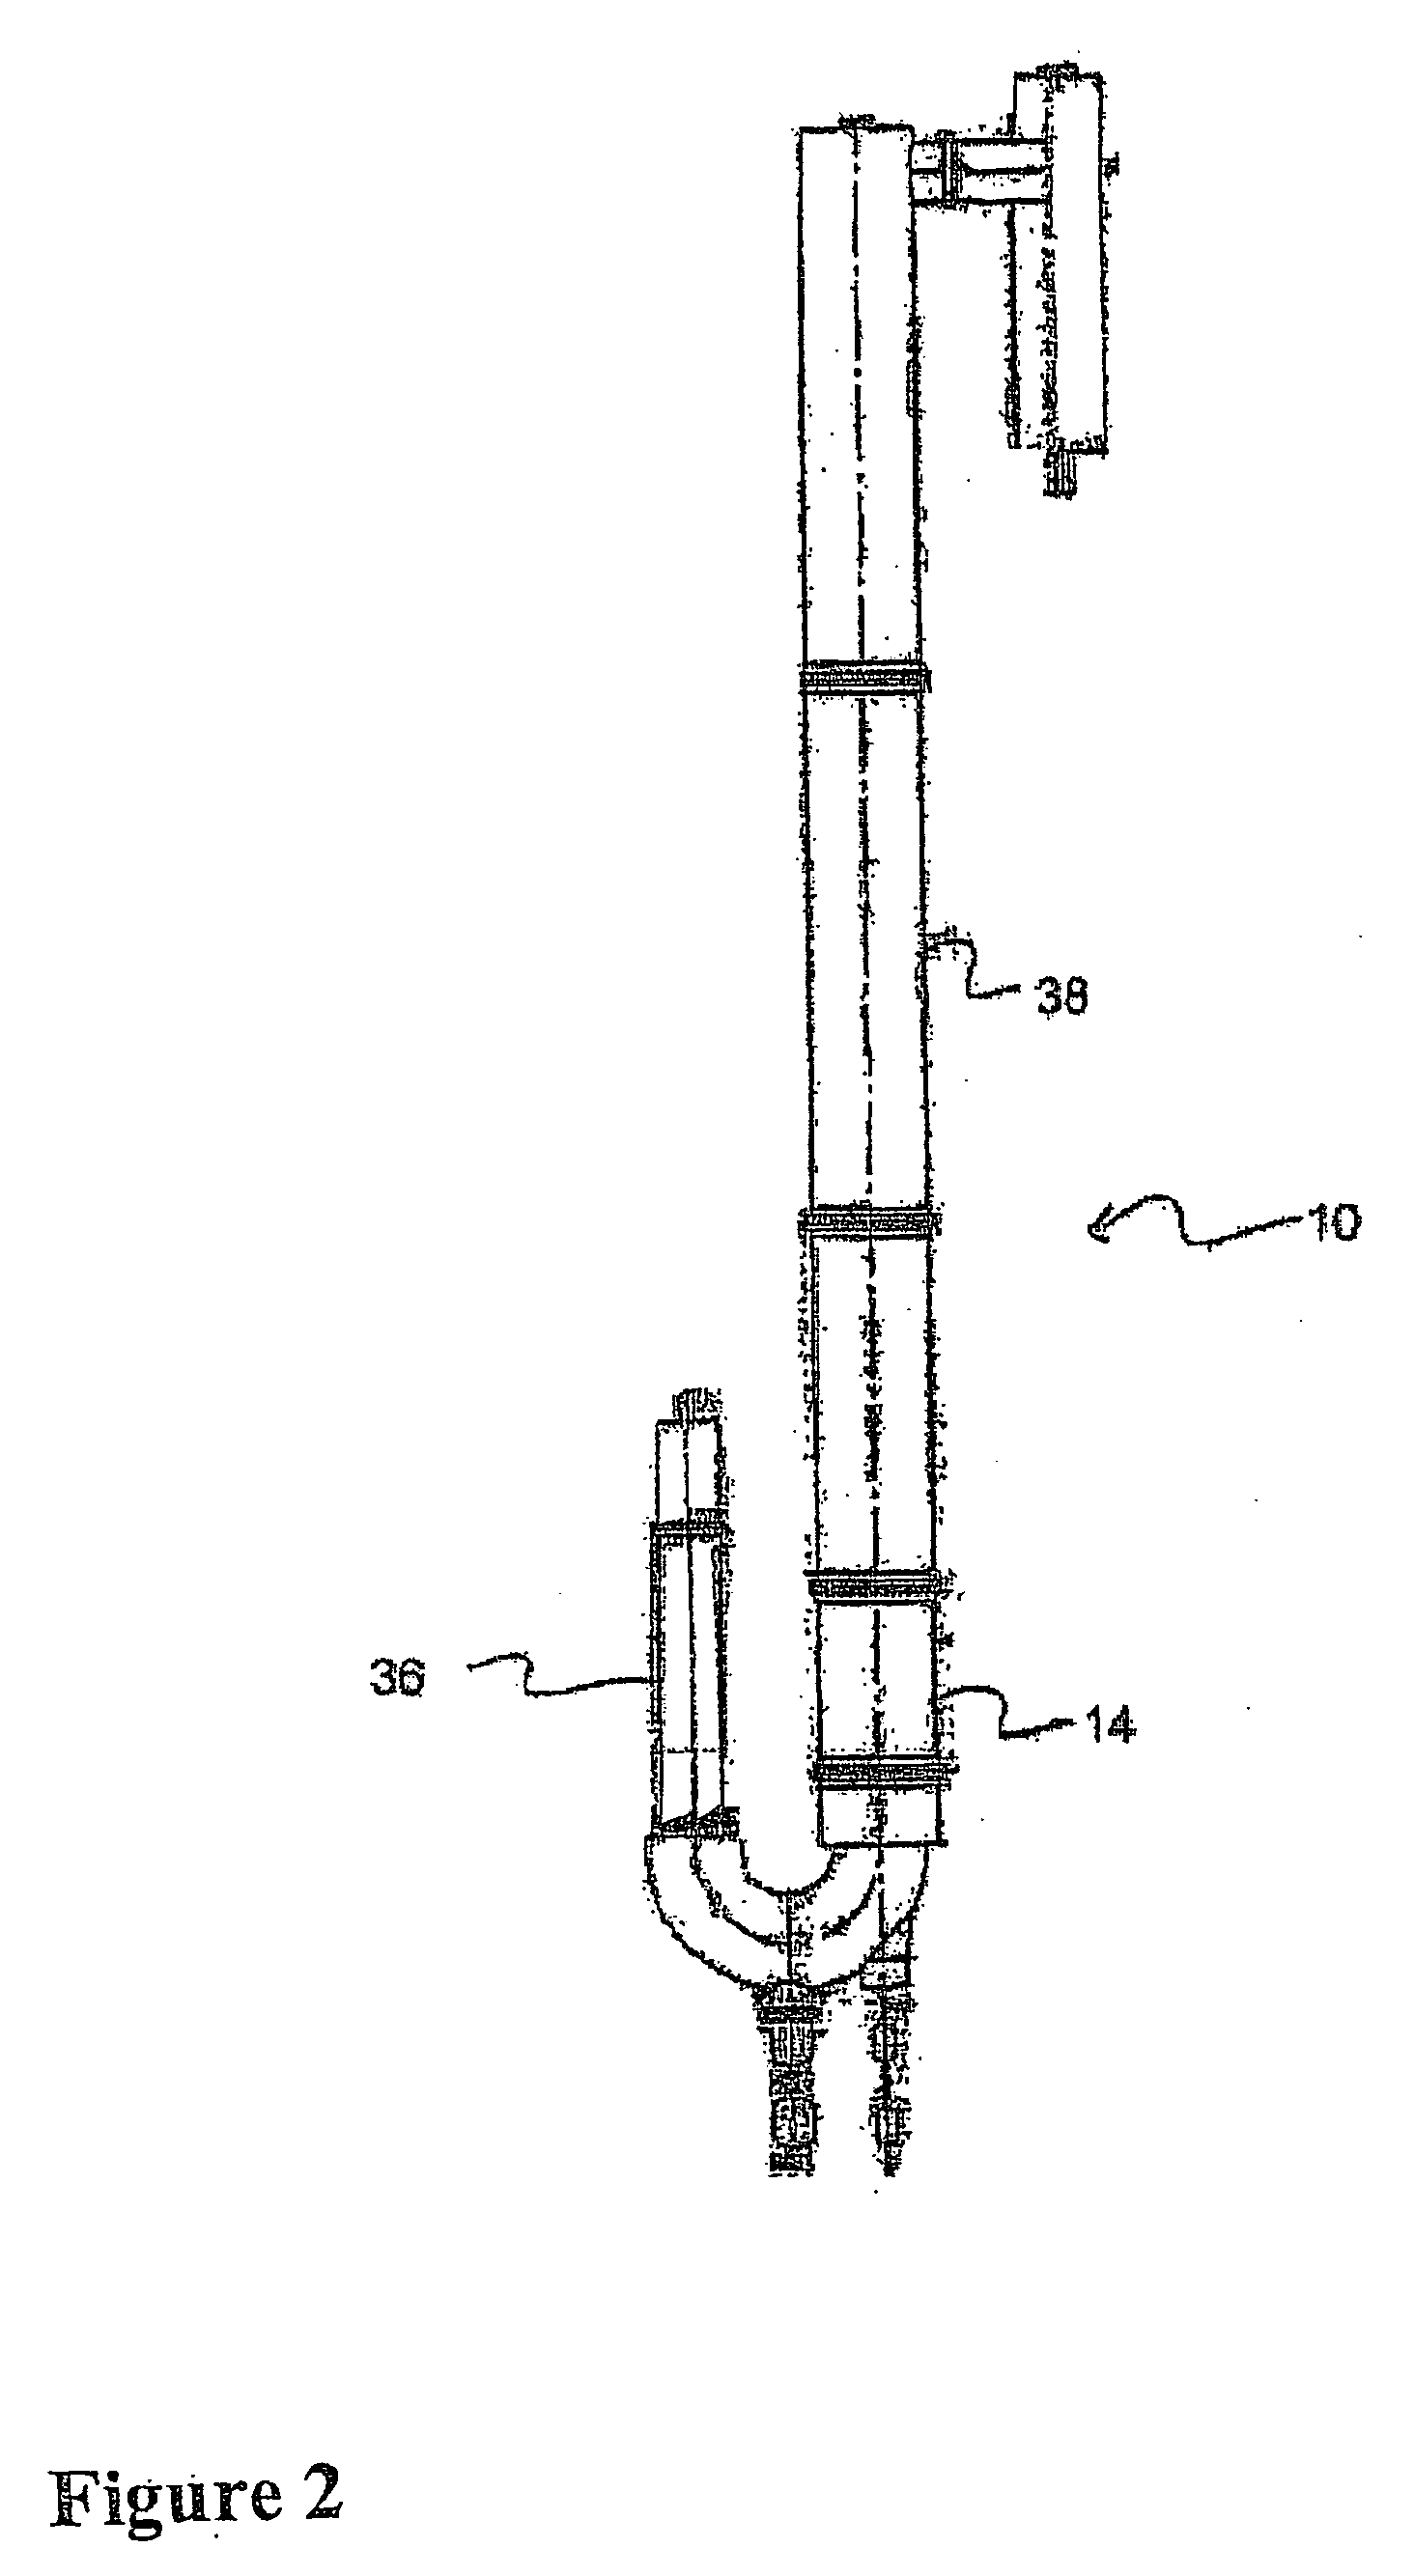 Pulse gasification and hot gas cleanup apparatus and process